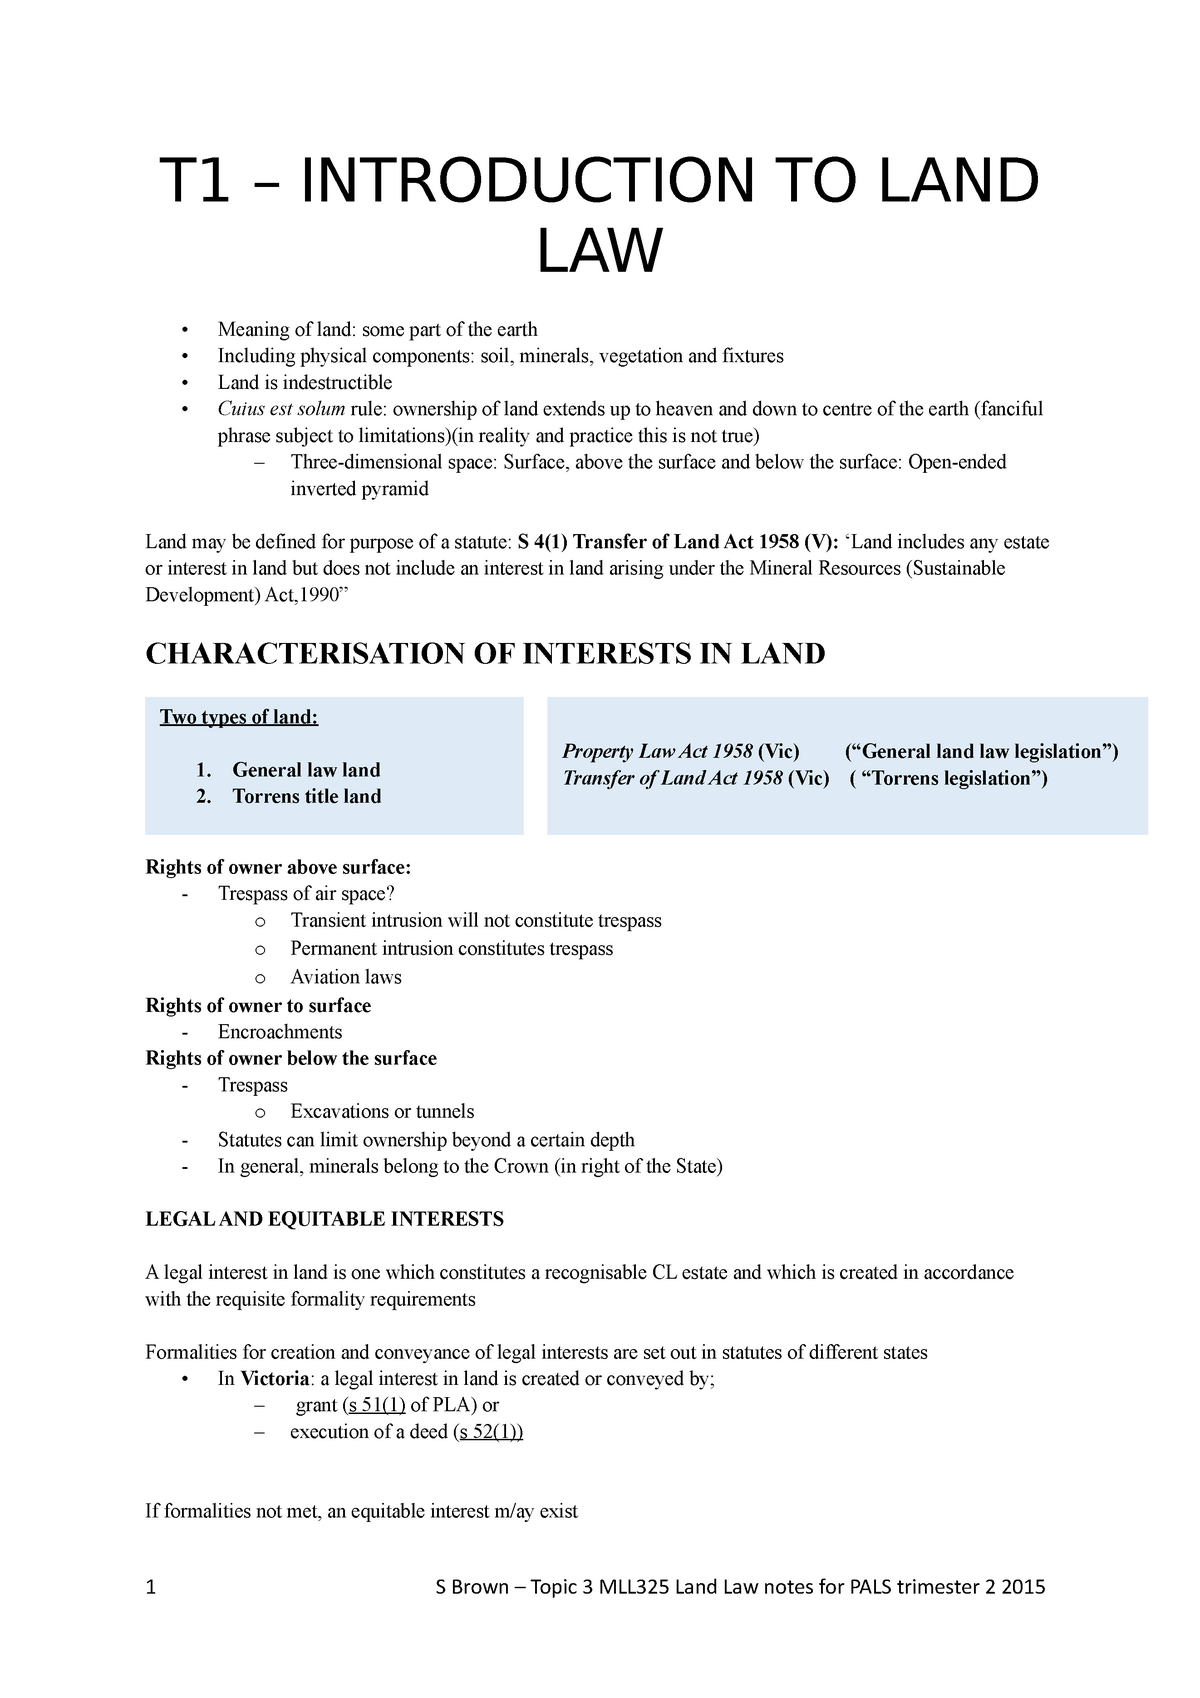 assign definition land law